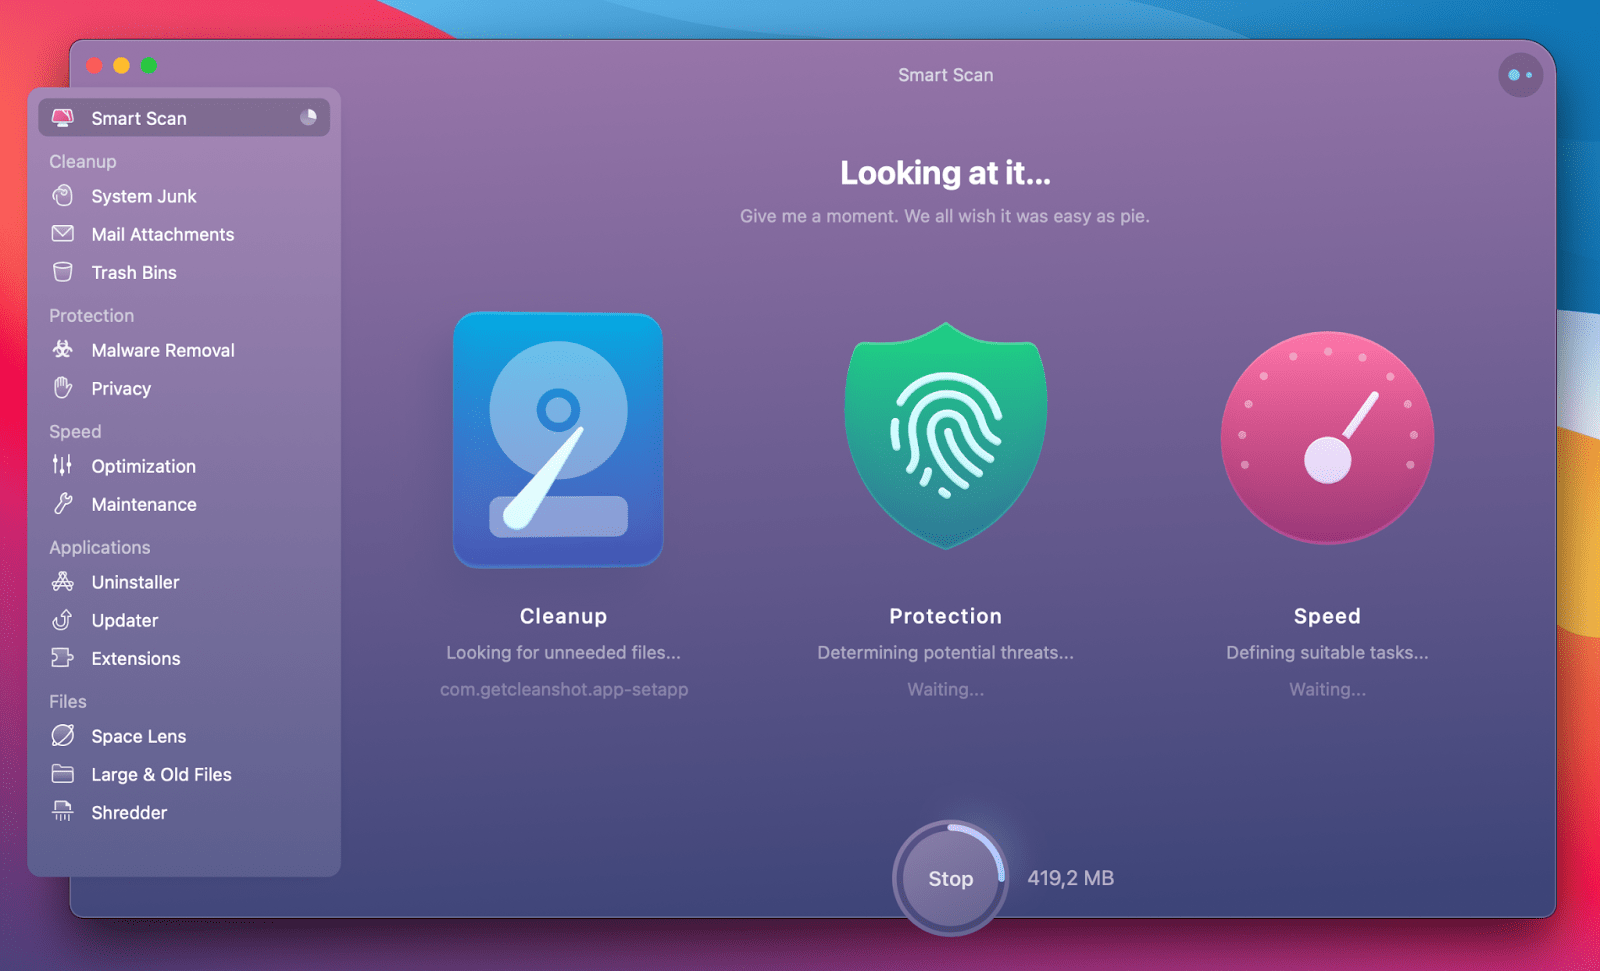 scan for a virus on a mac